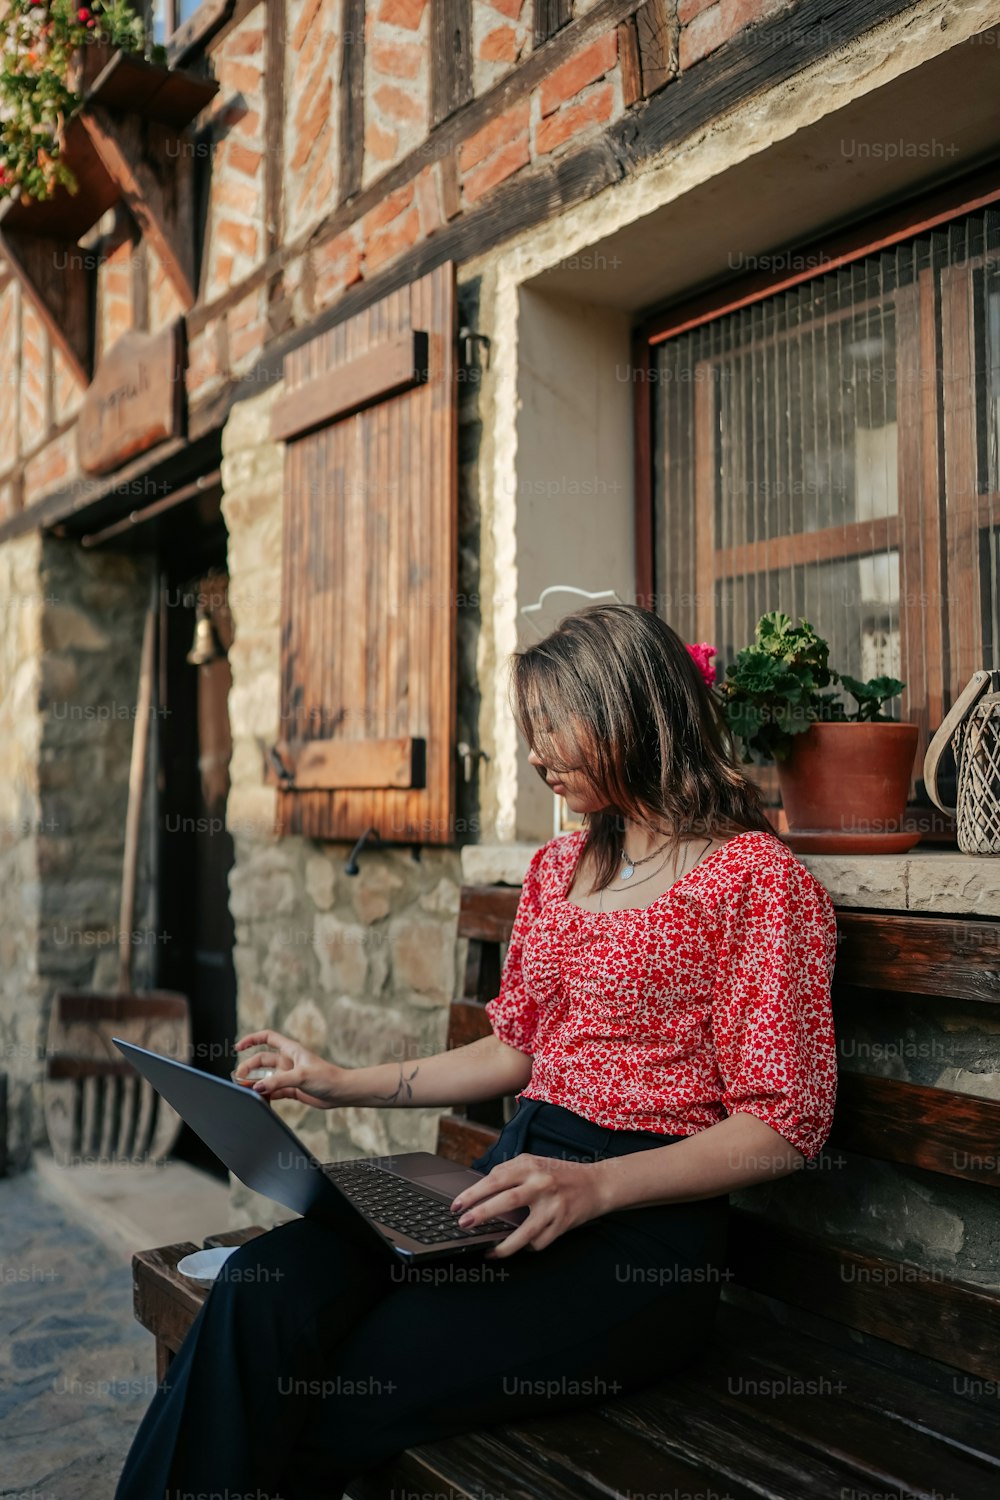 a woman sitting on a bench using a laptop computer